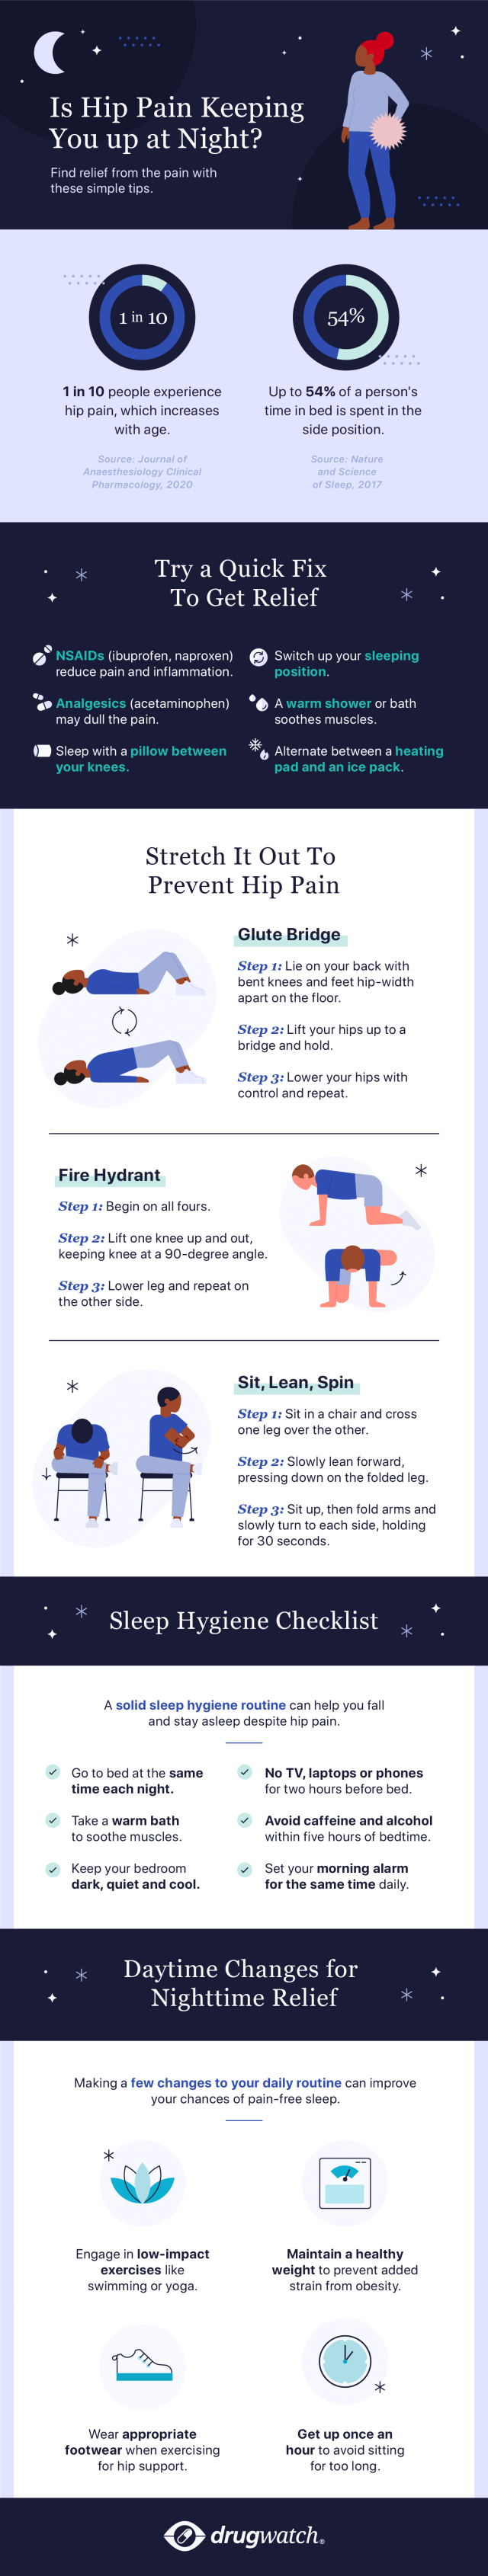 Infographic showing how to manage hip pain to sleep better.